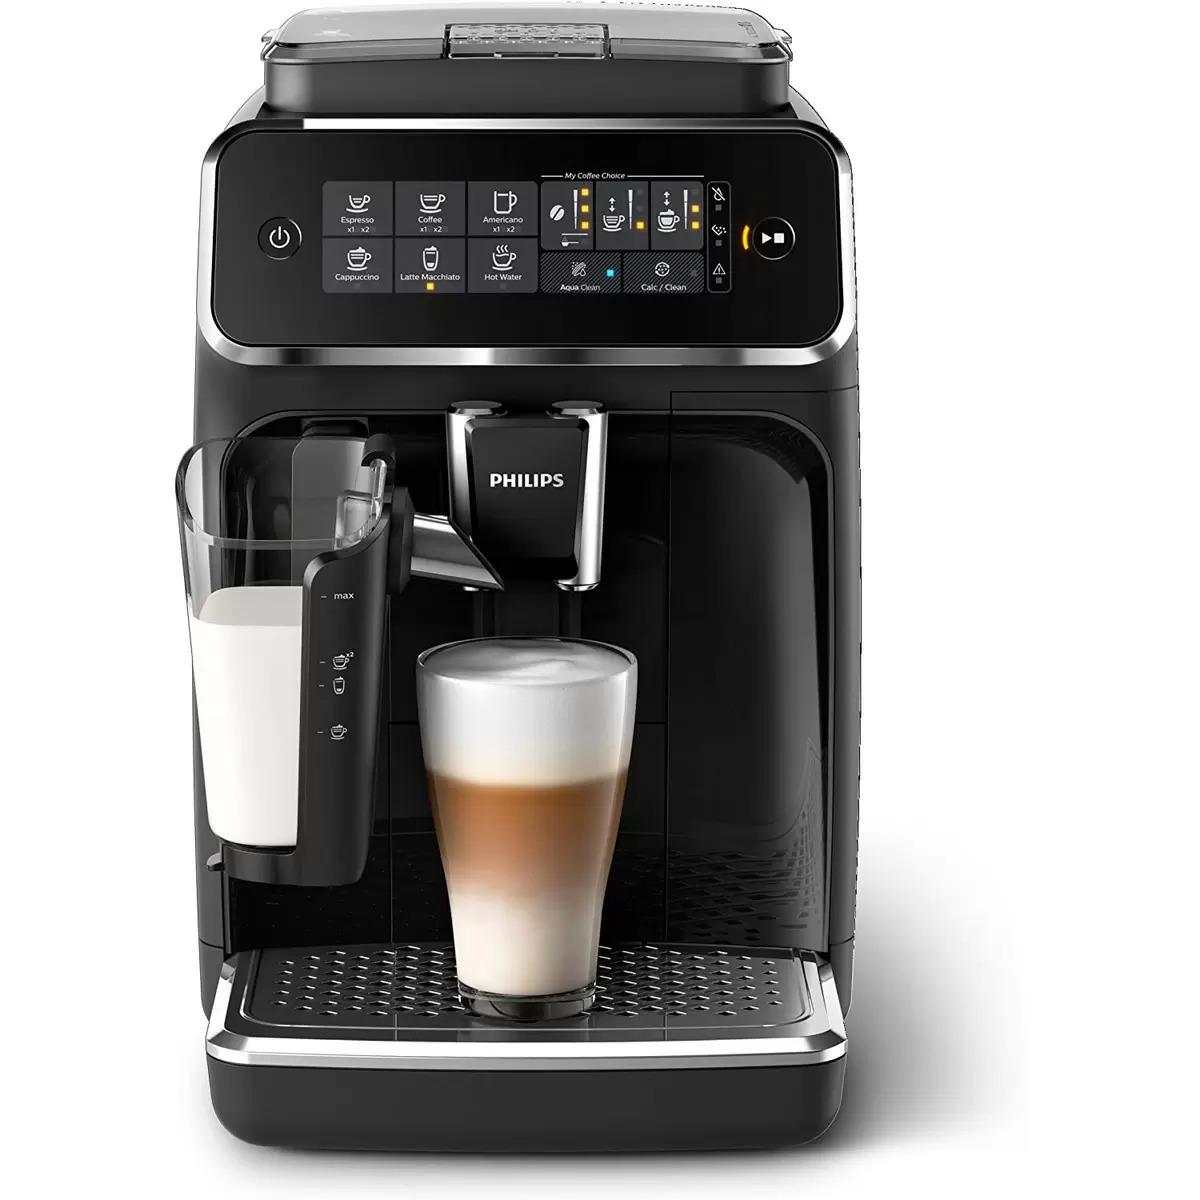 Philips 3200 Series Fully Automatic Espresso Machine for $679.15 Shipped